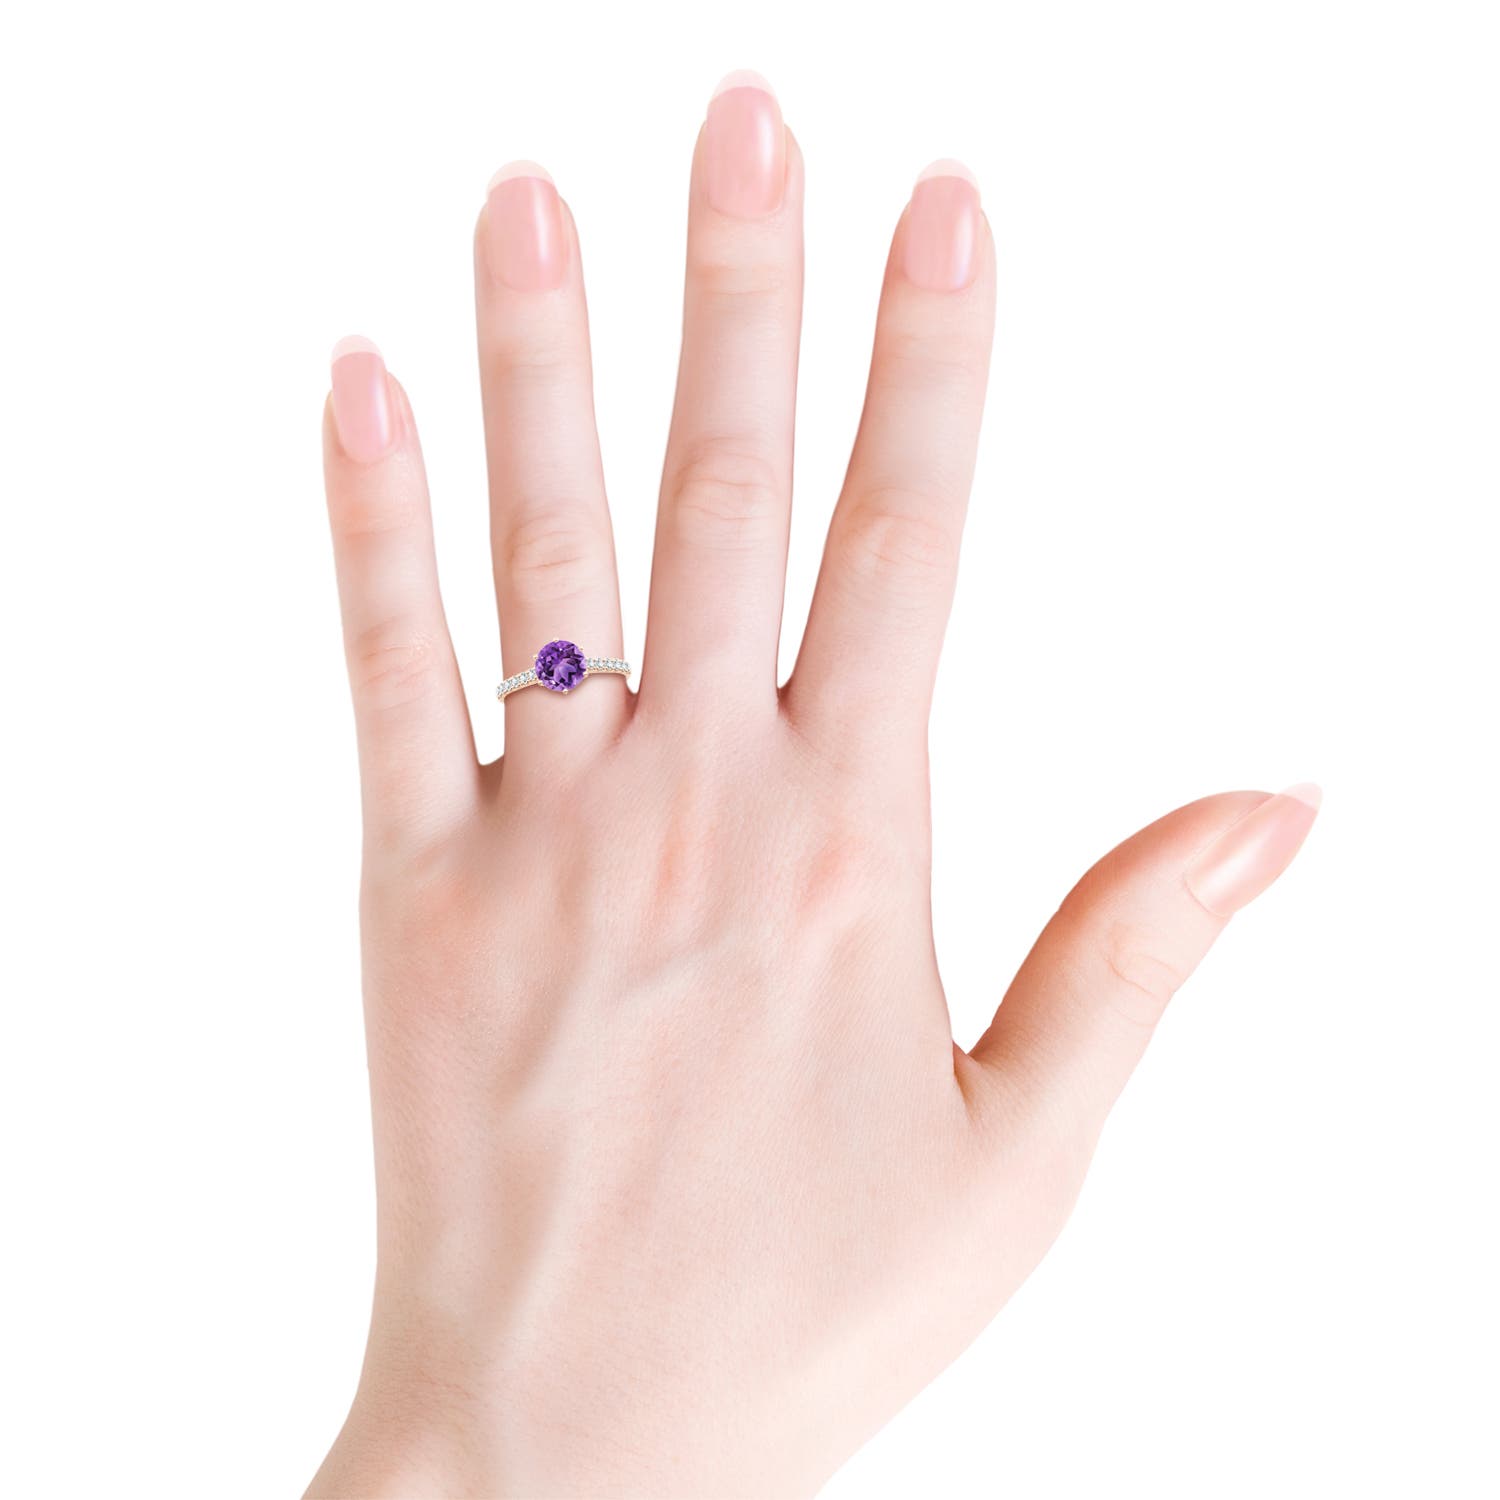 AA - Amethyst / 1.4 CT / 14 KT Rose Gold